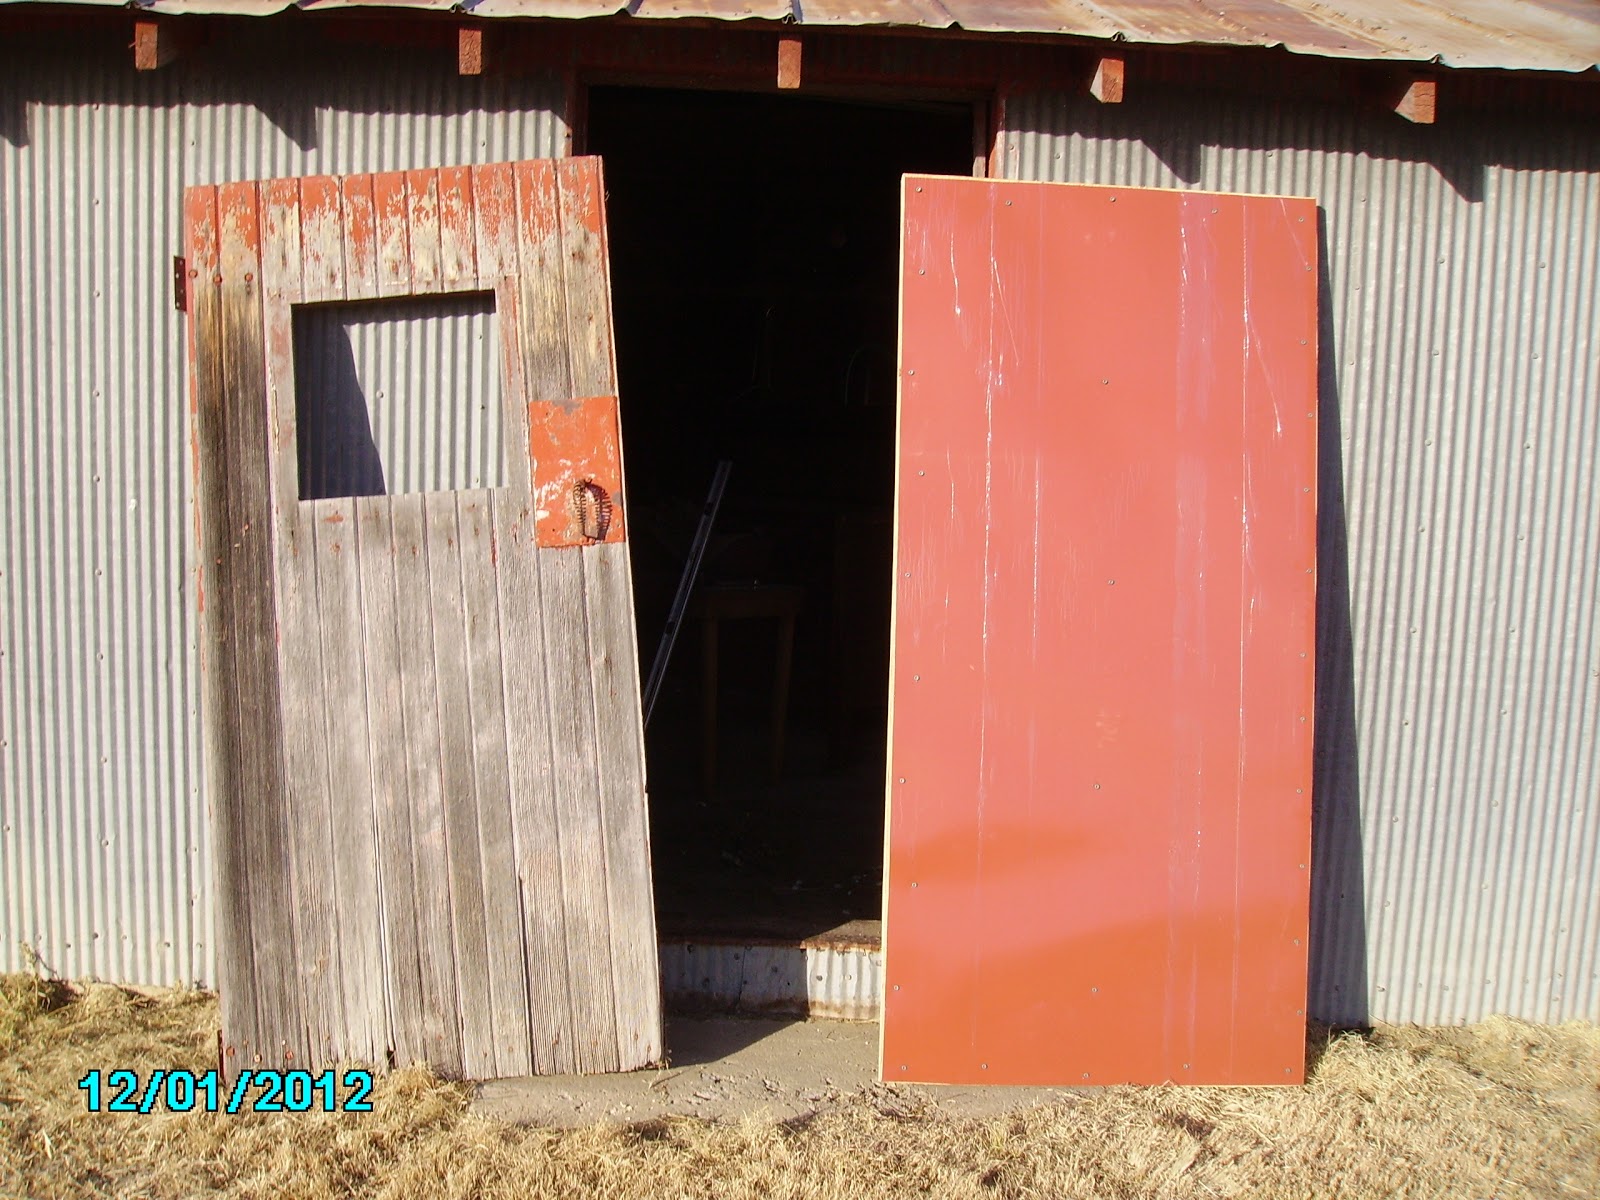 ... left-over wood and metal, we decided to make a new walk-in door, too